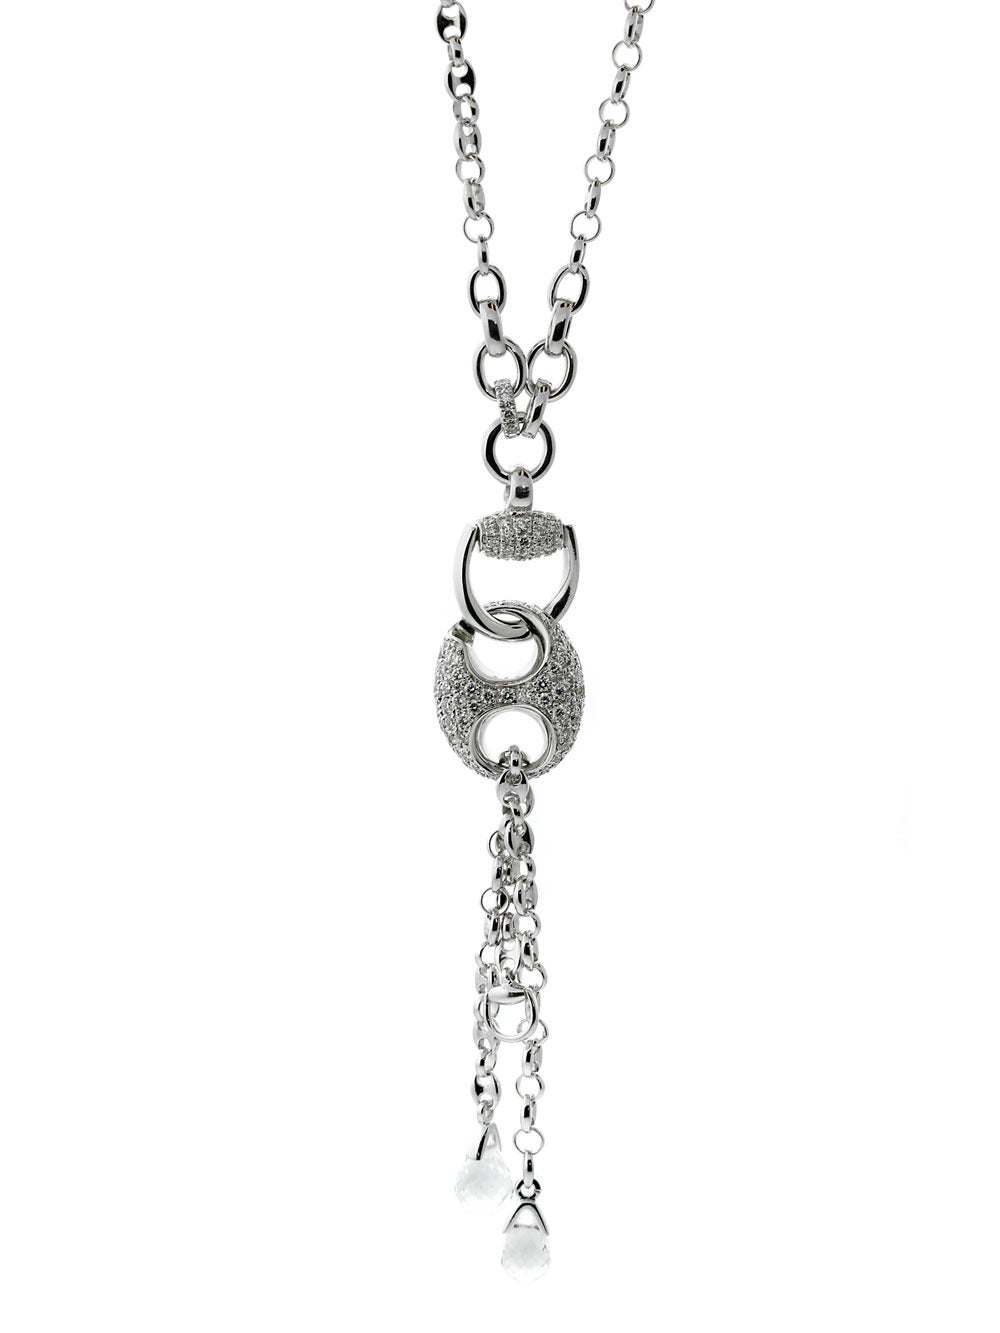 A stunning Horsebit necklace by Gucci, crafted in 18k White Gold featuring 1.01ct of Round Brilliant Vs1 E-F Color Diamonds. The necklace measures 17